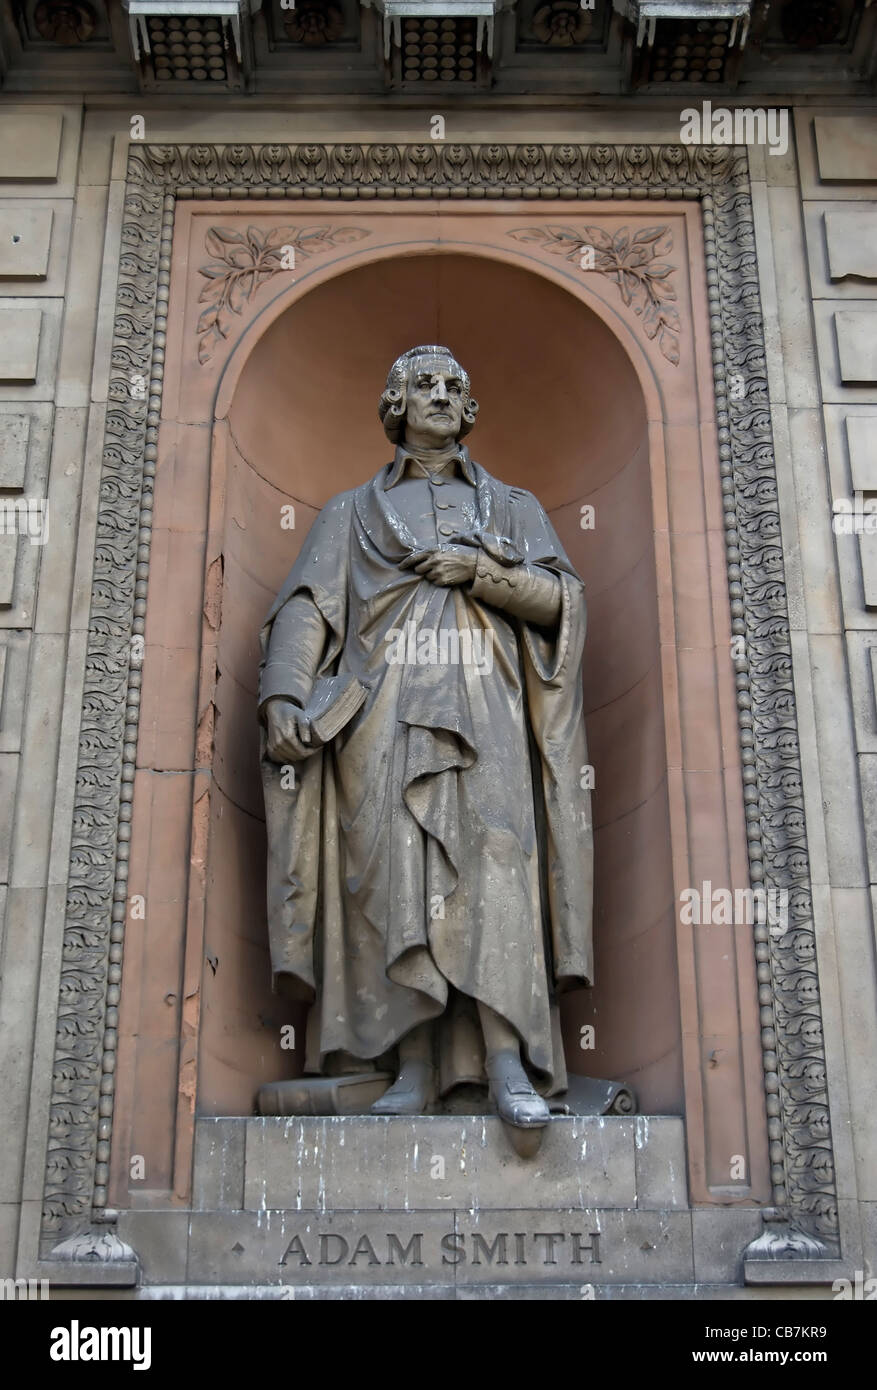 19th century niche statue of economist adam smith, by william theed the younger, 6 burlington gardens, london, england Stock Photo